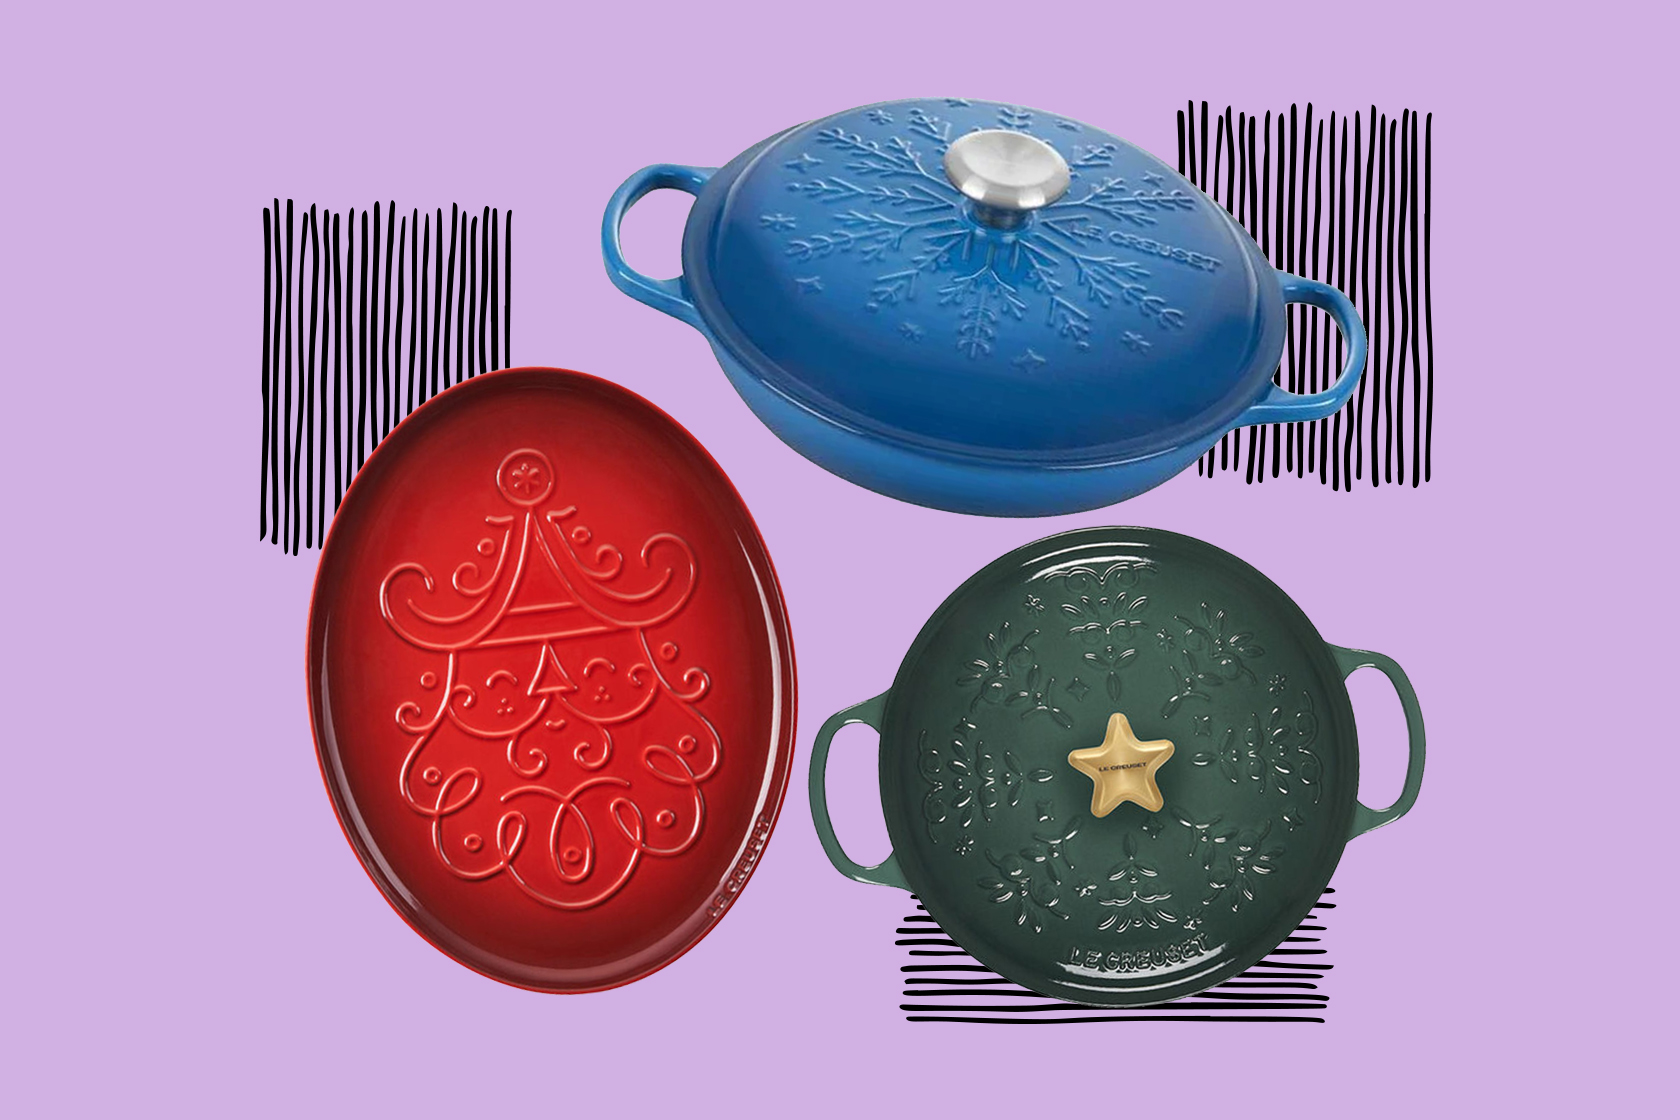 Le Creuset Noel Collection Holiday Tree Round Dutch Oven